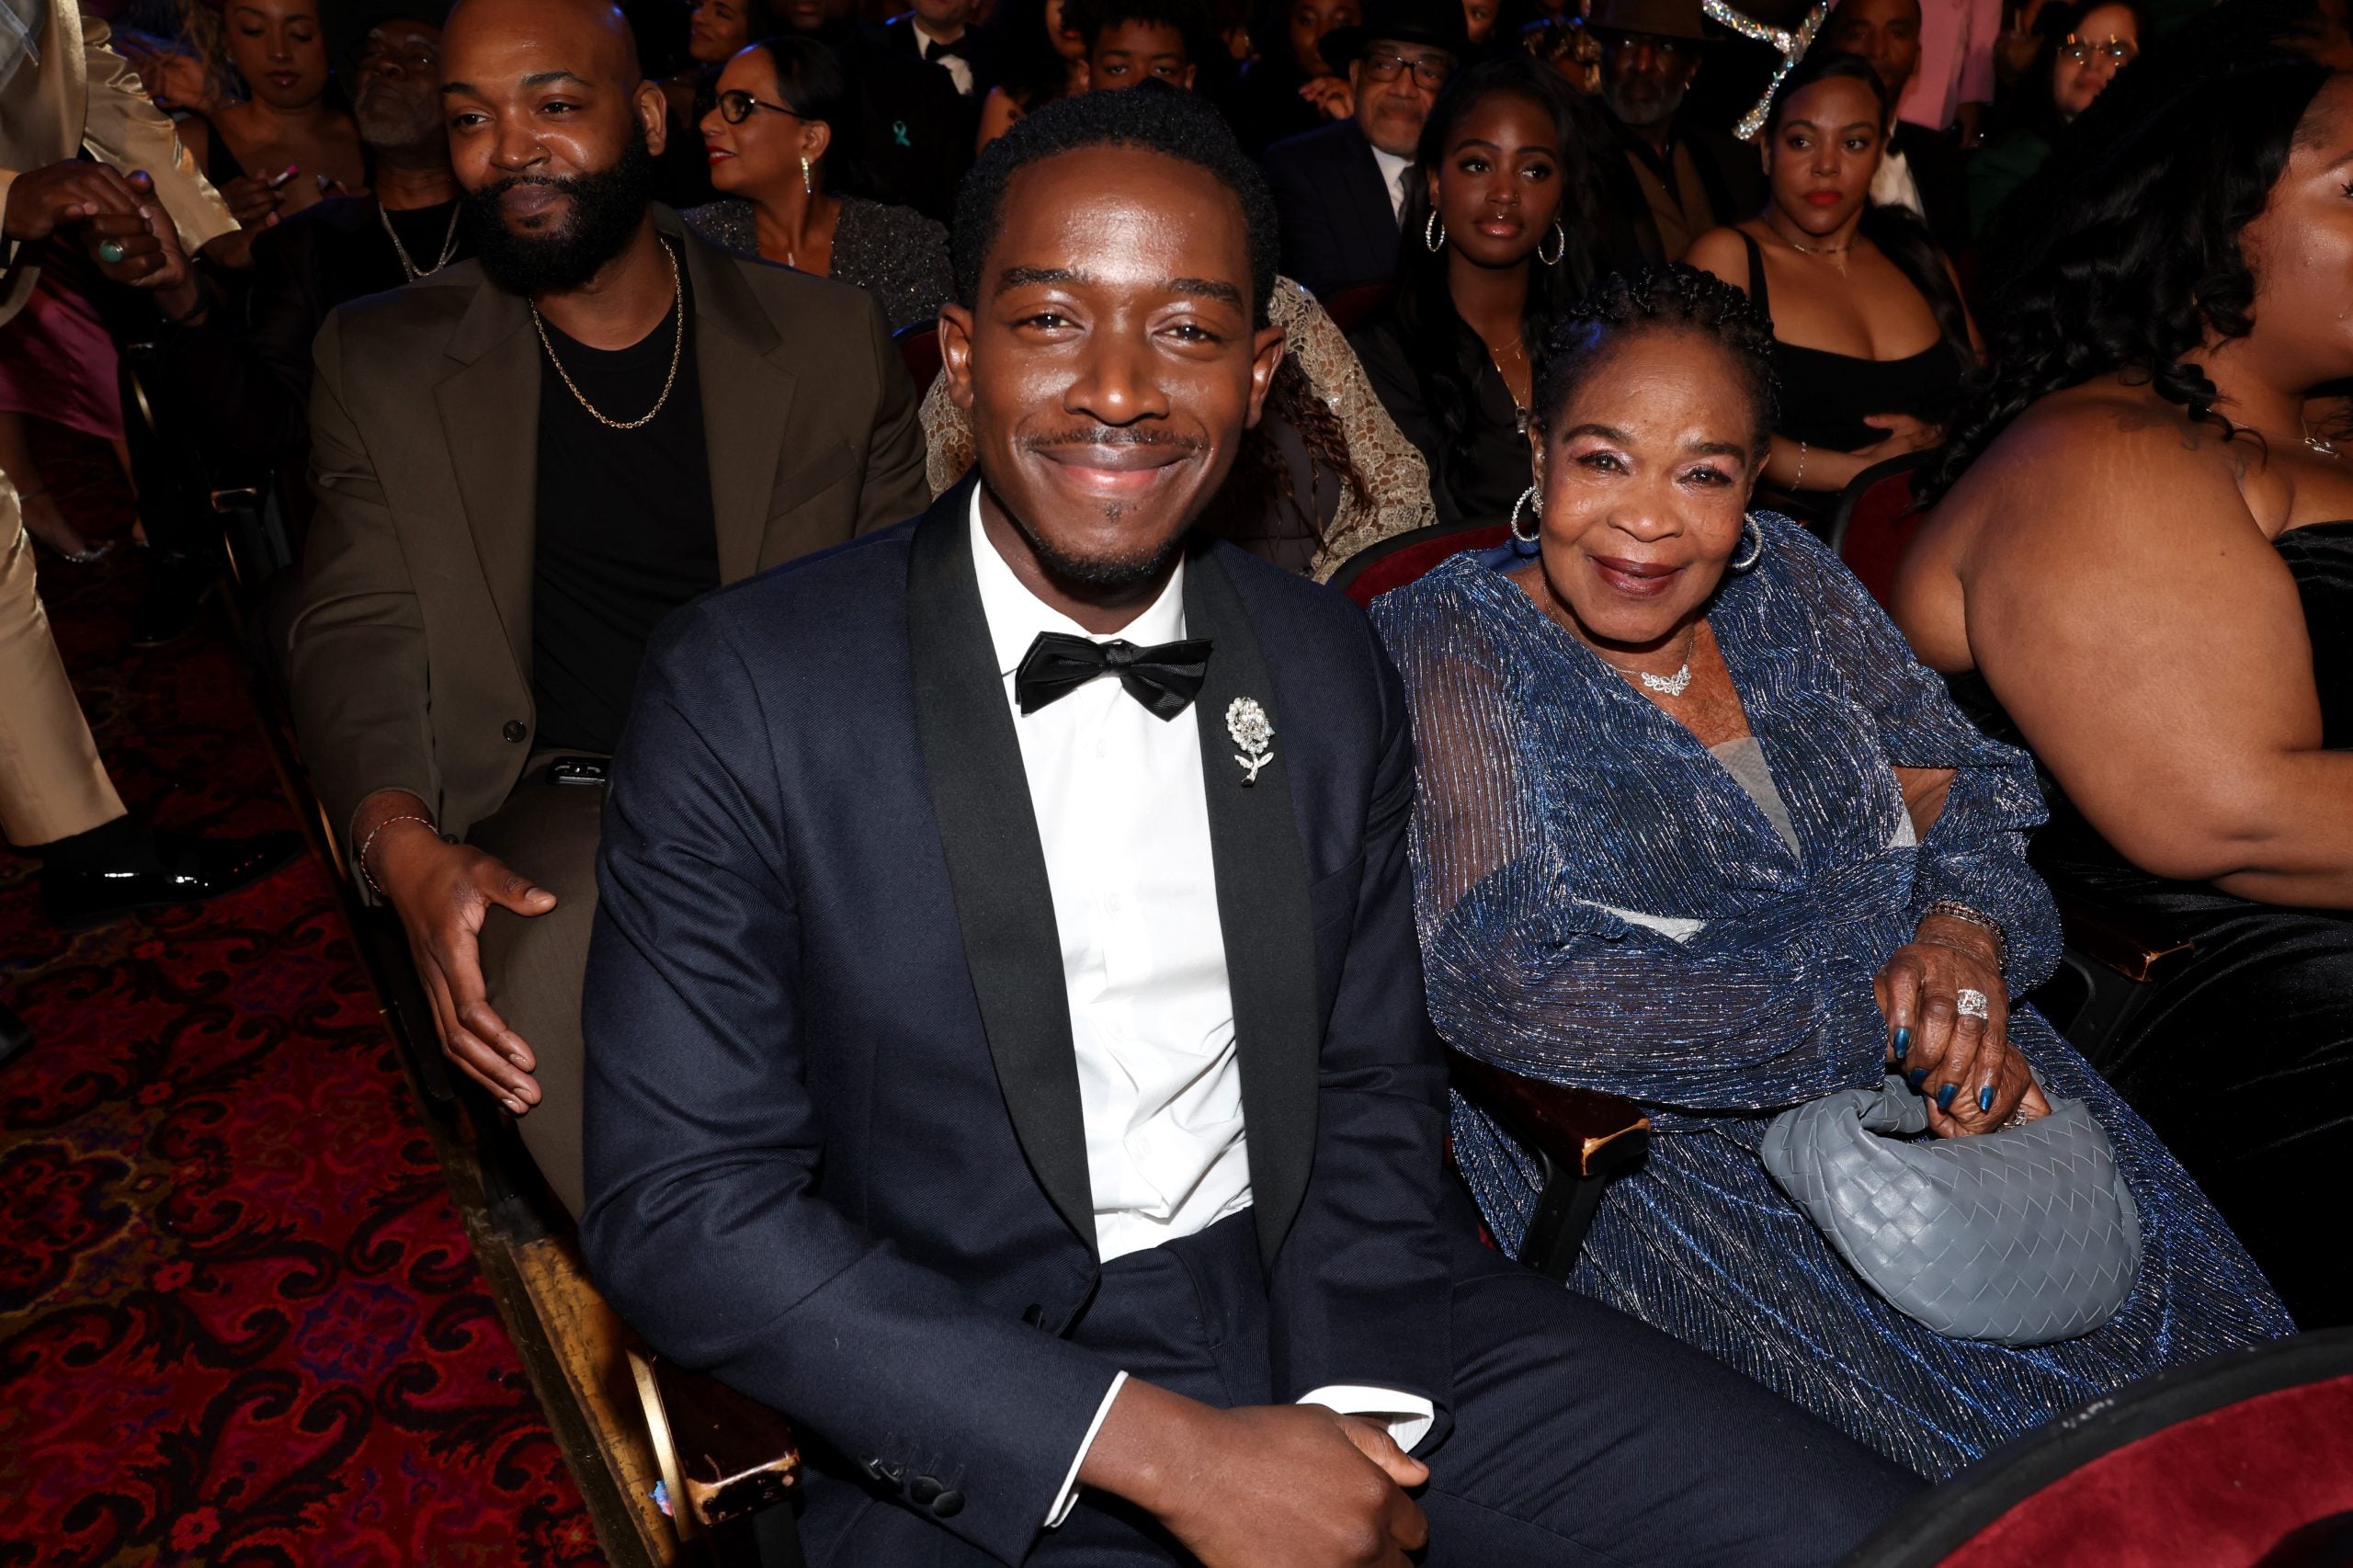 Damson Idris's Mom Traveled 17 Hours From Lagos To LA To Be His Plus-One For The NAACP Image Awards